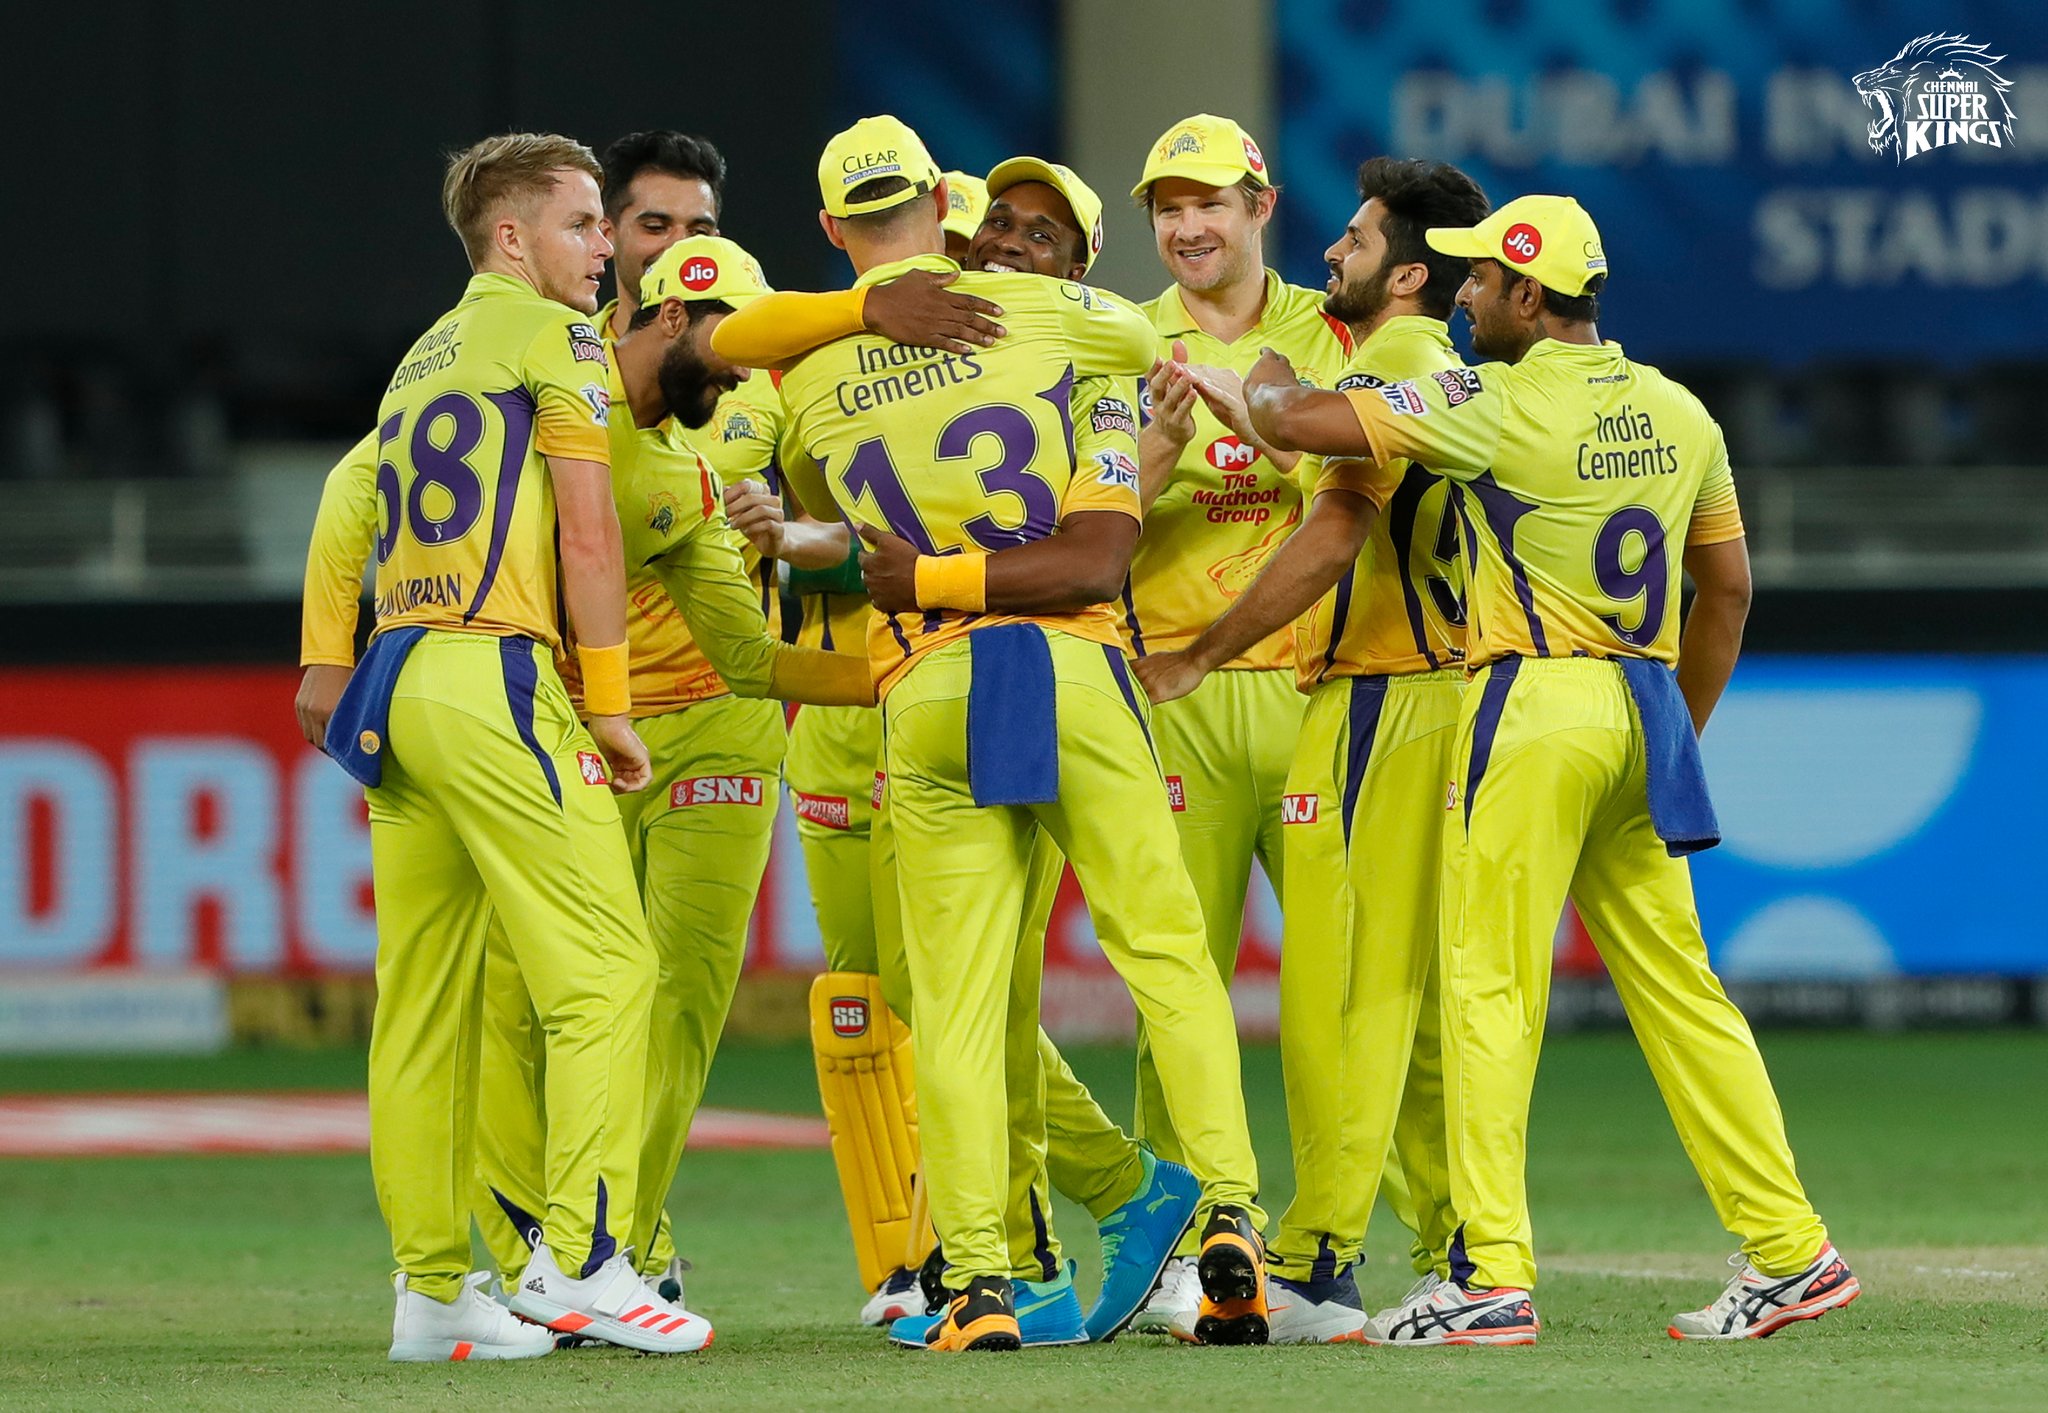 imran tahir tweets about csk victory over srh yesterday